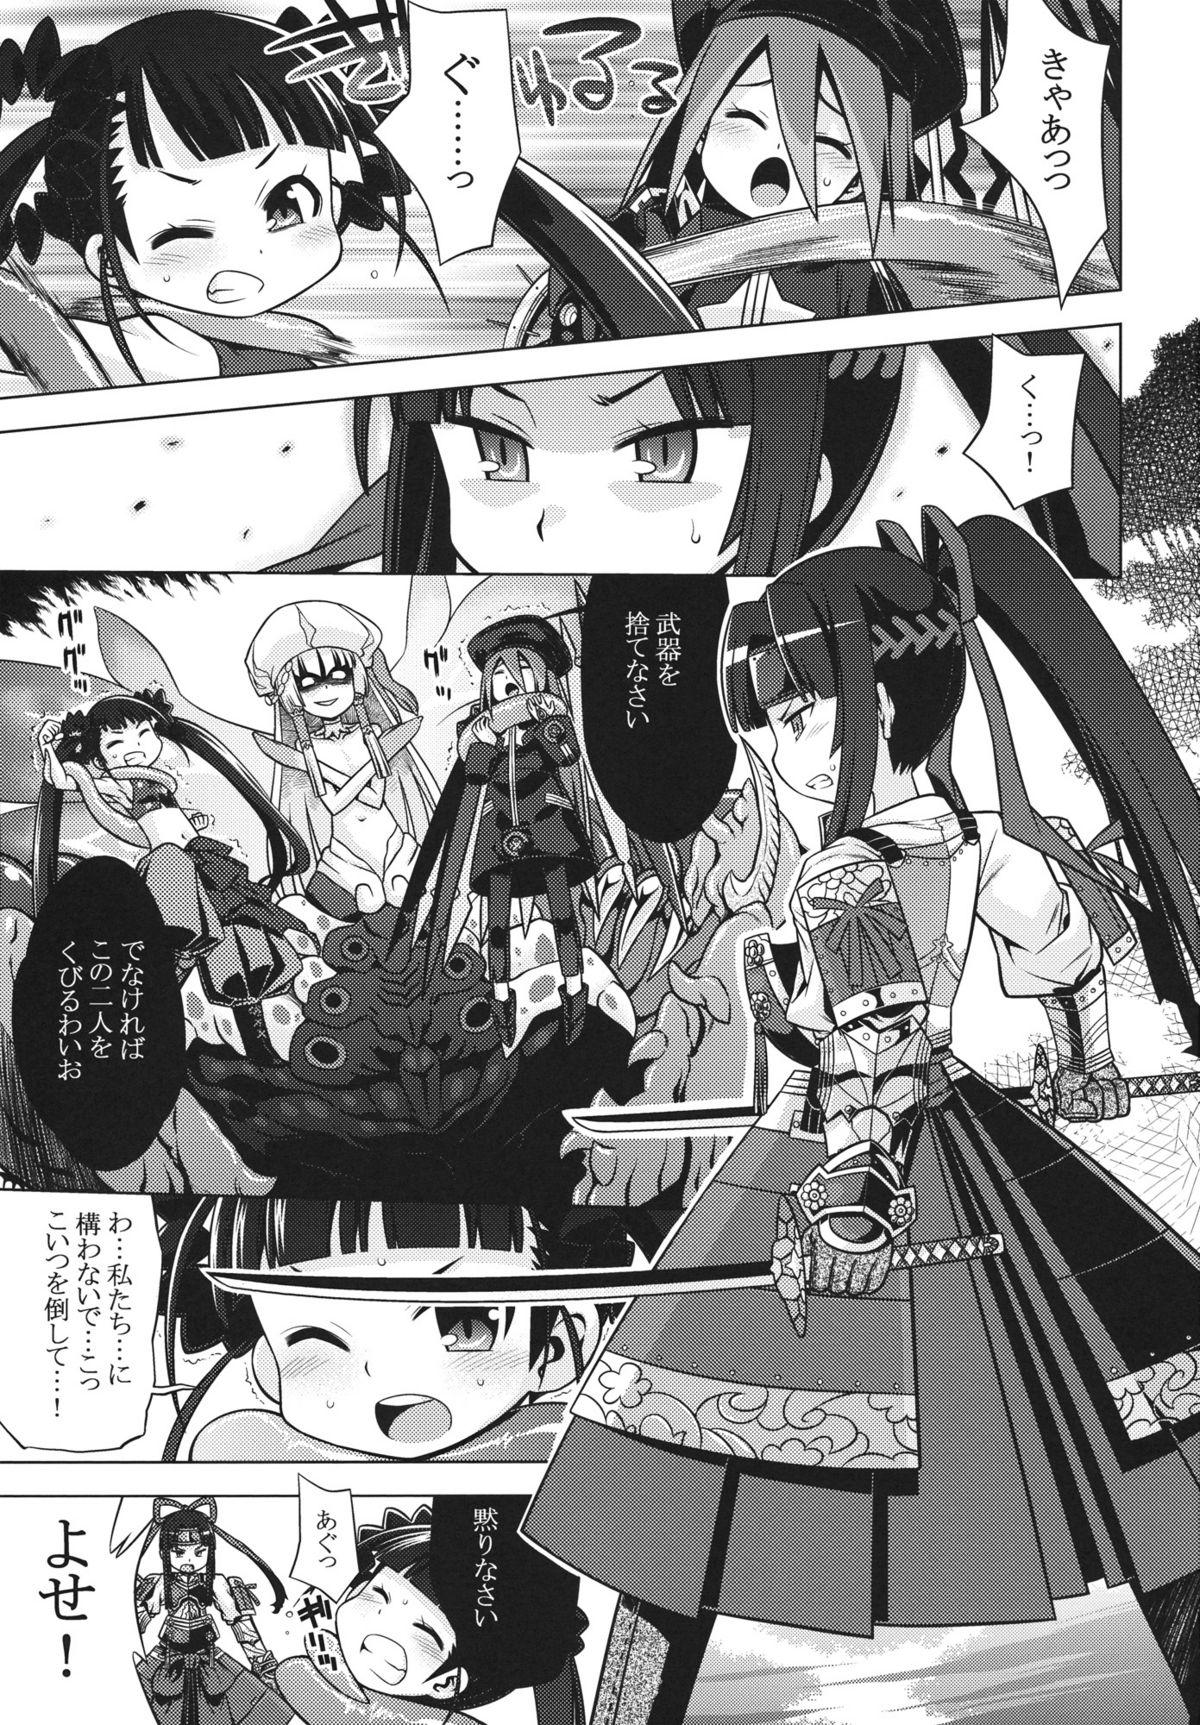 Pica Sekaiju no Anone 20 - Etrian odyssey From - Page 3